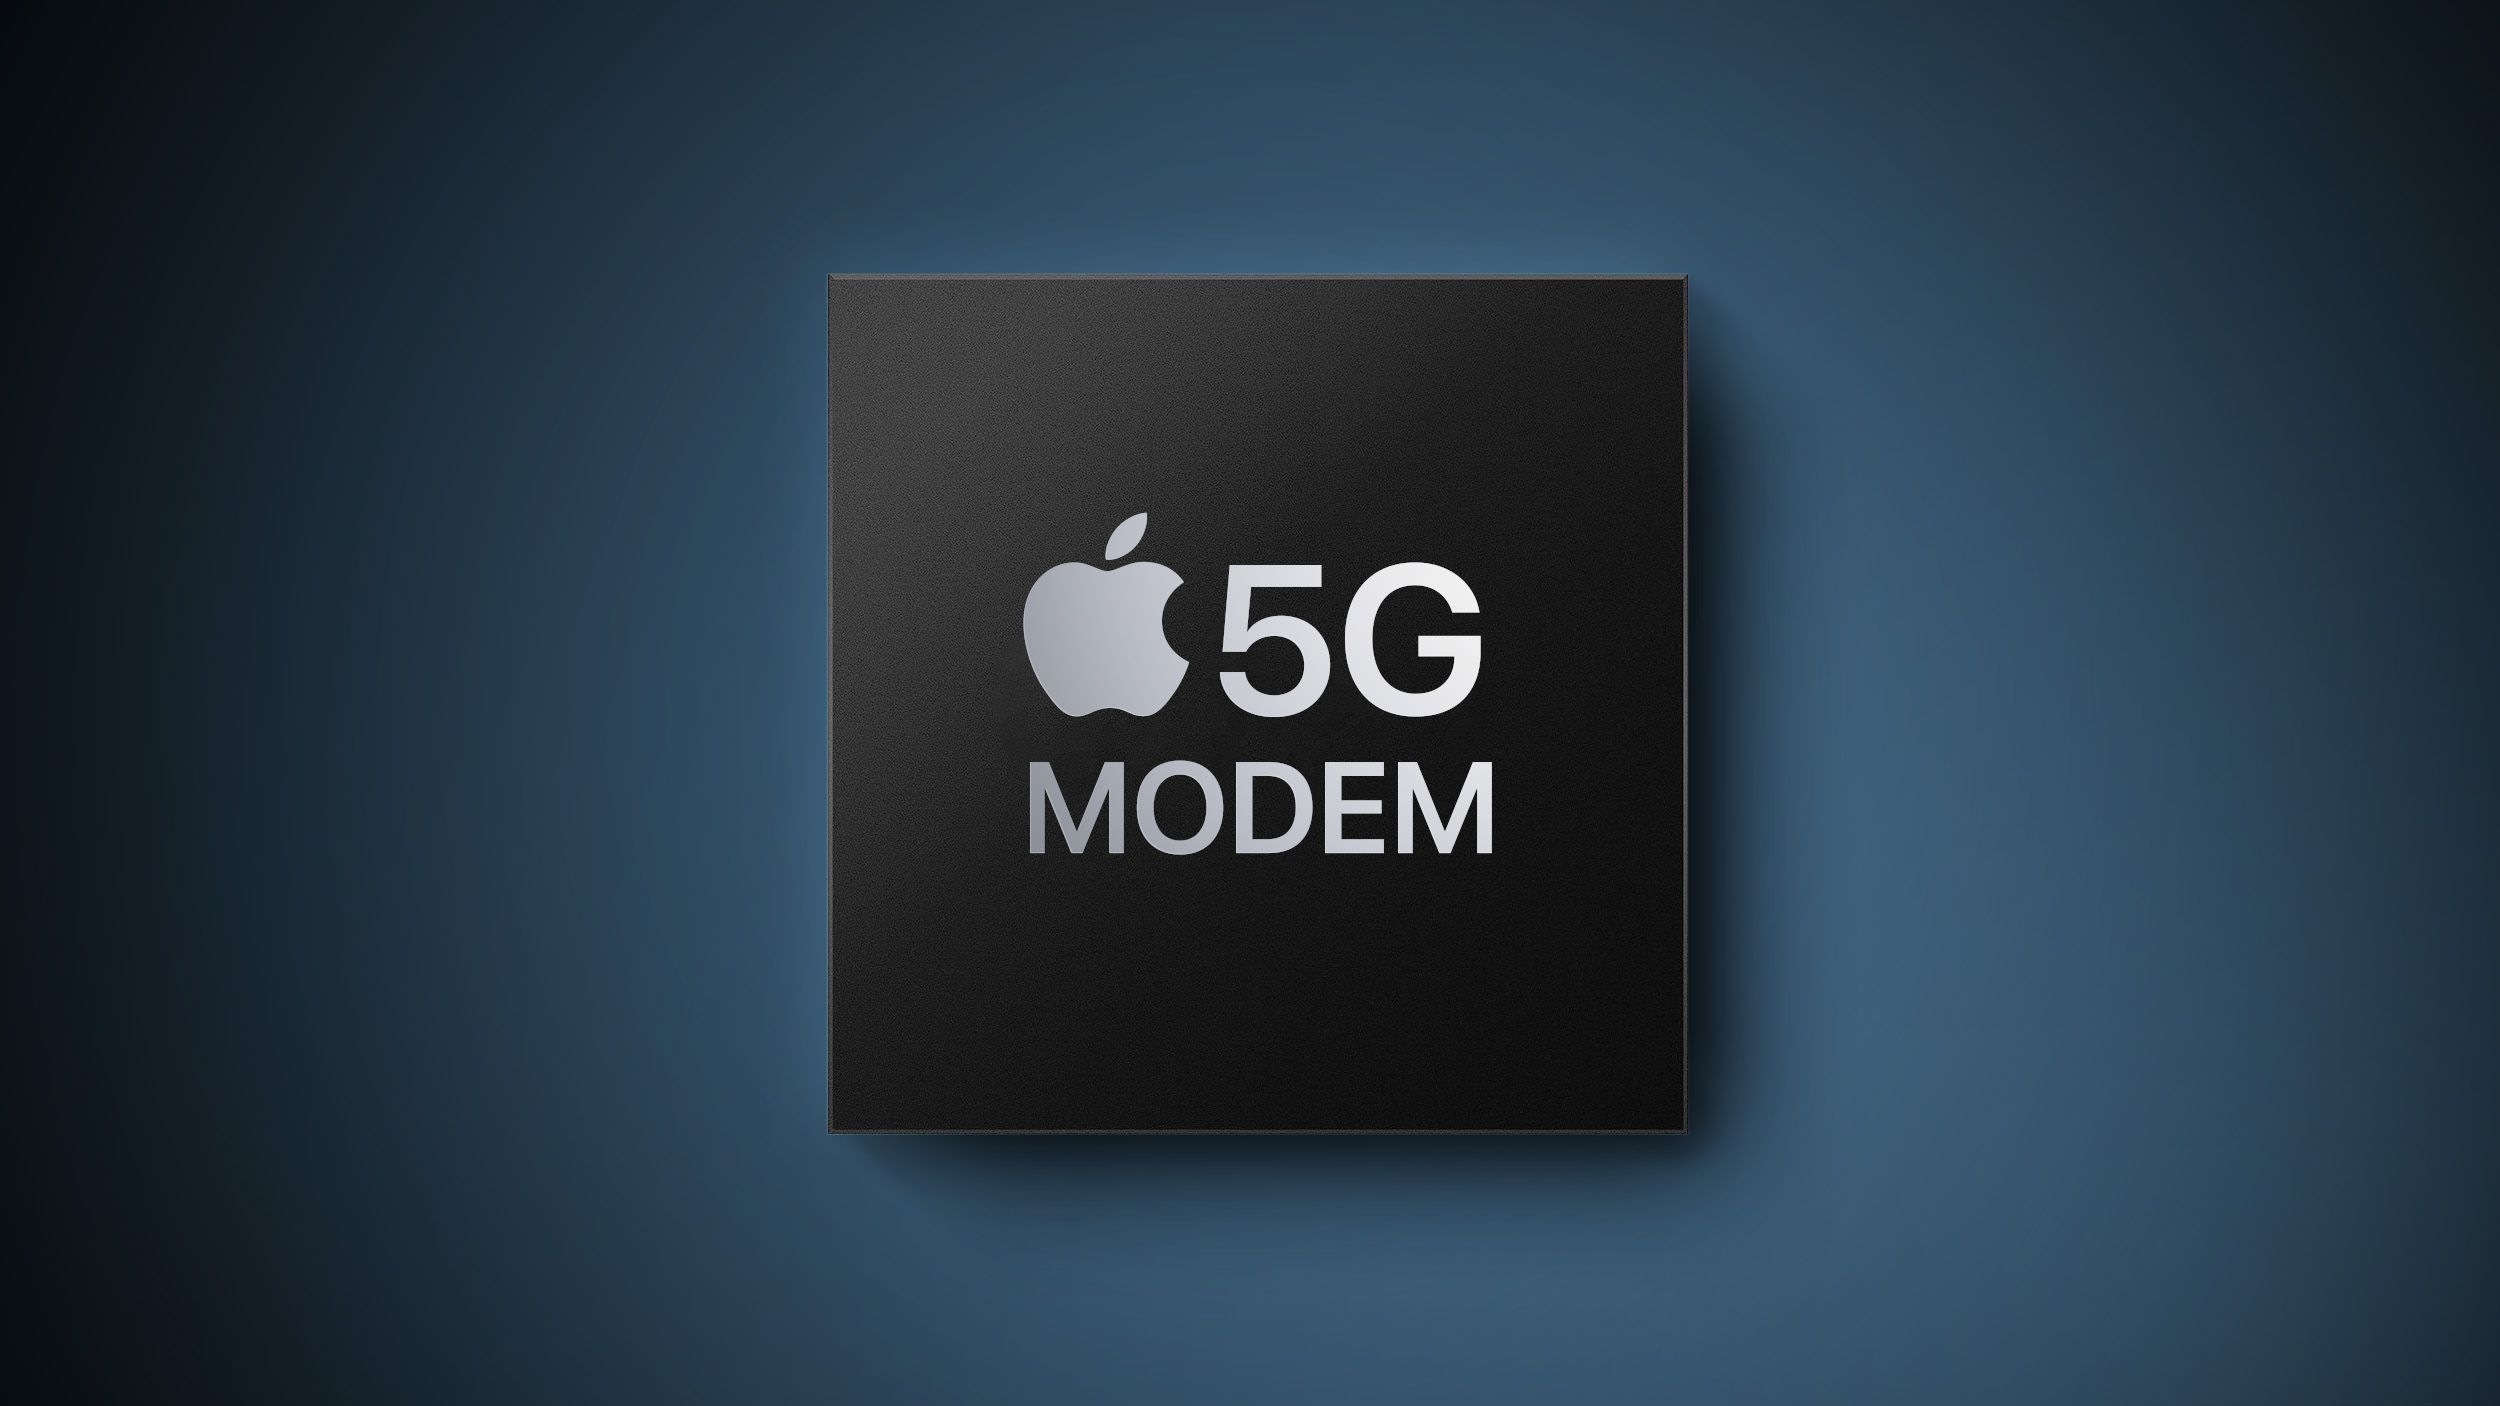 iphone-16-will-use-apples-own-5g-modems-suggests-qualcomm-ceo